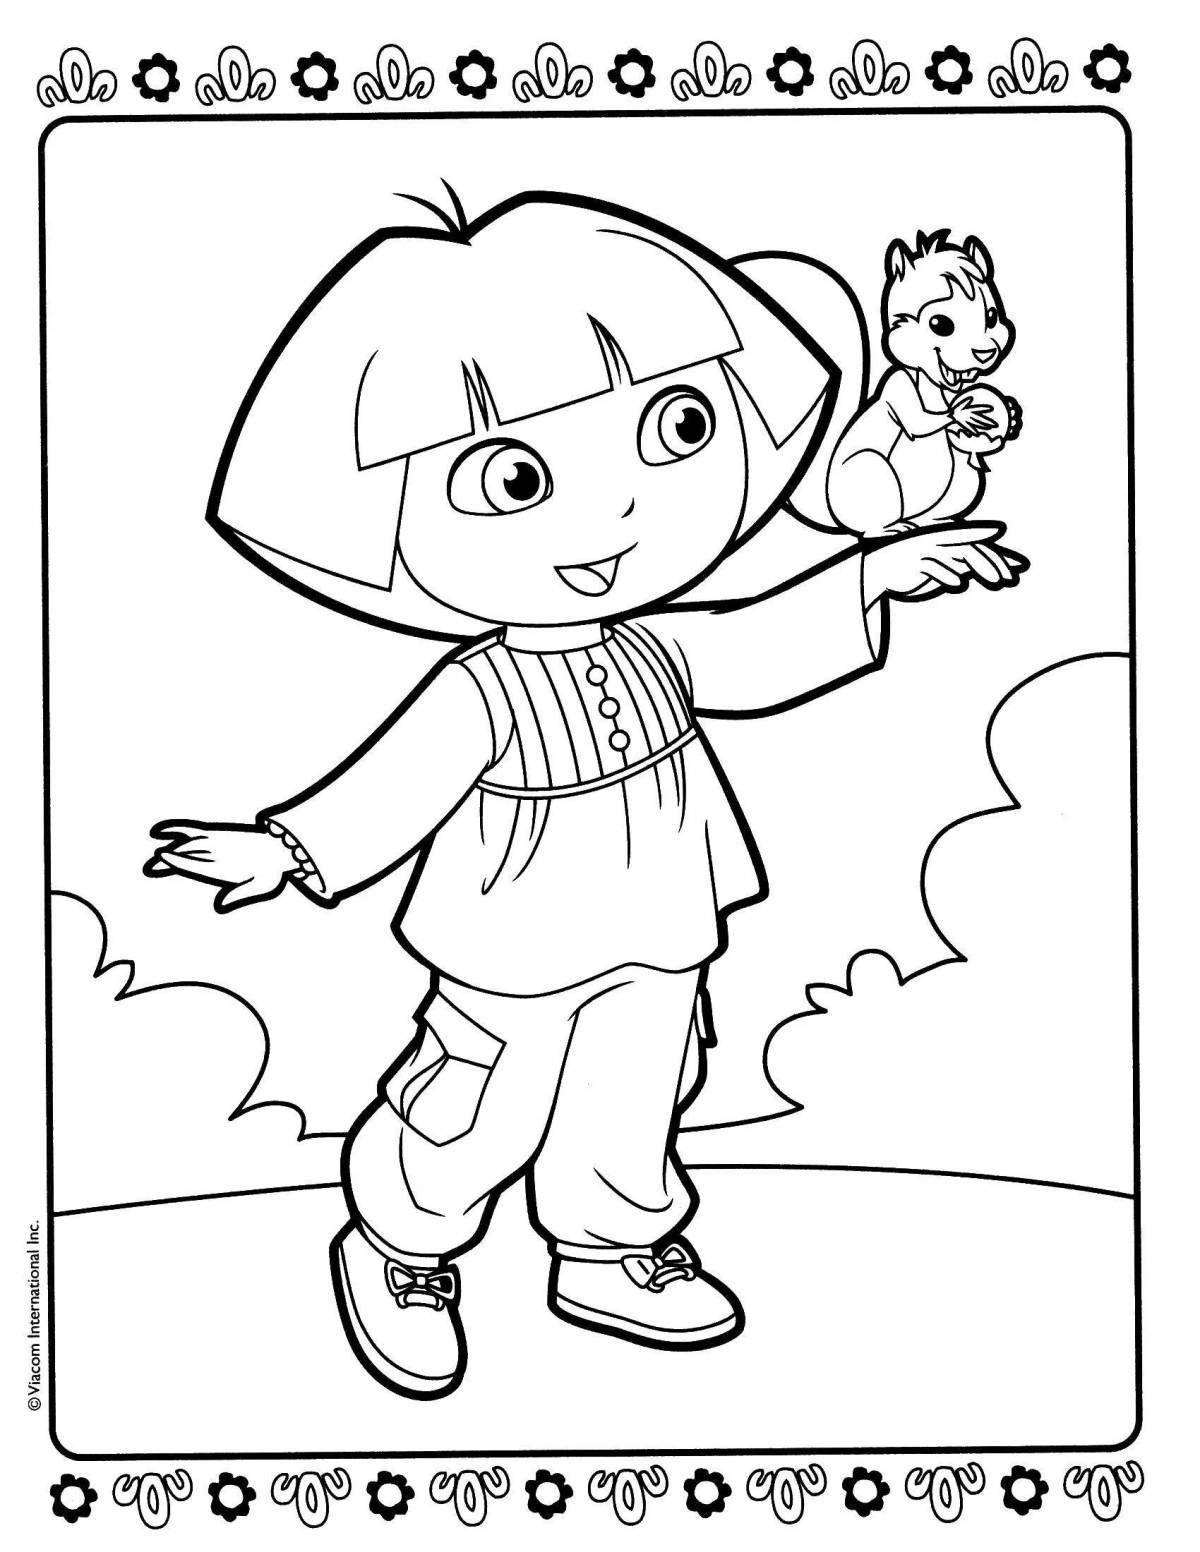 Coloring page of an enthusiastic little boy